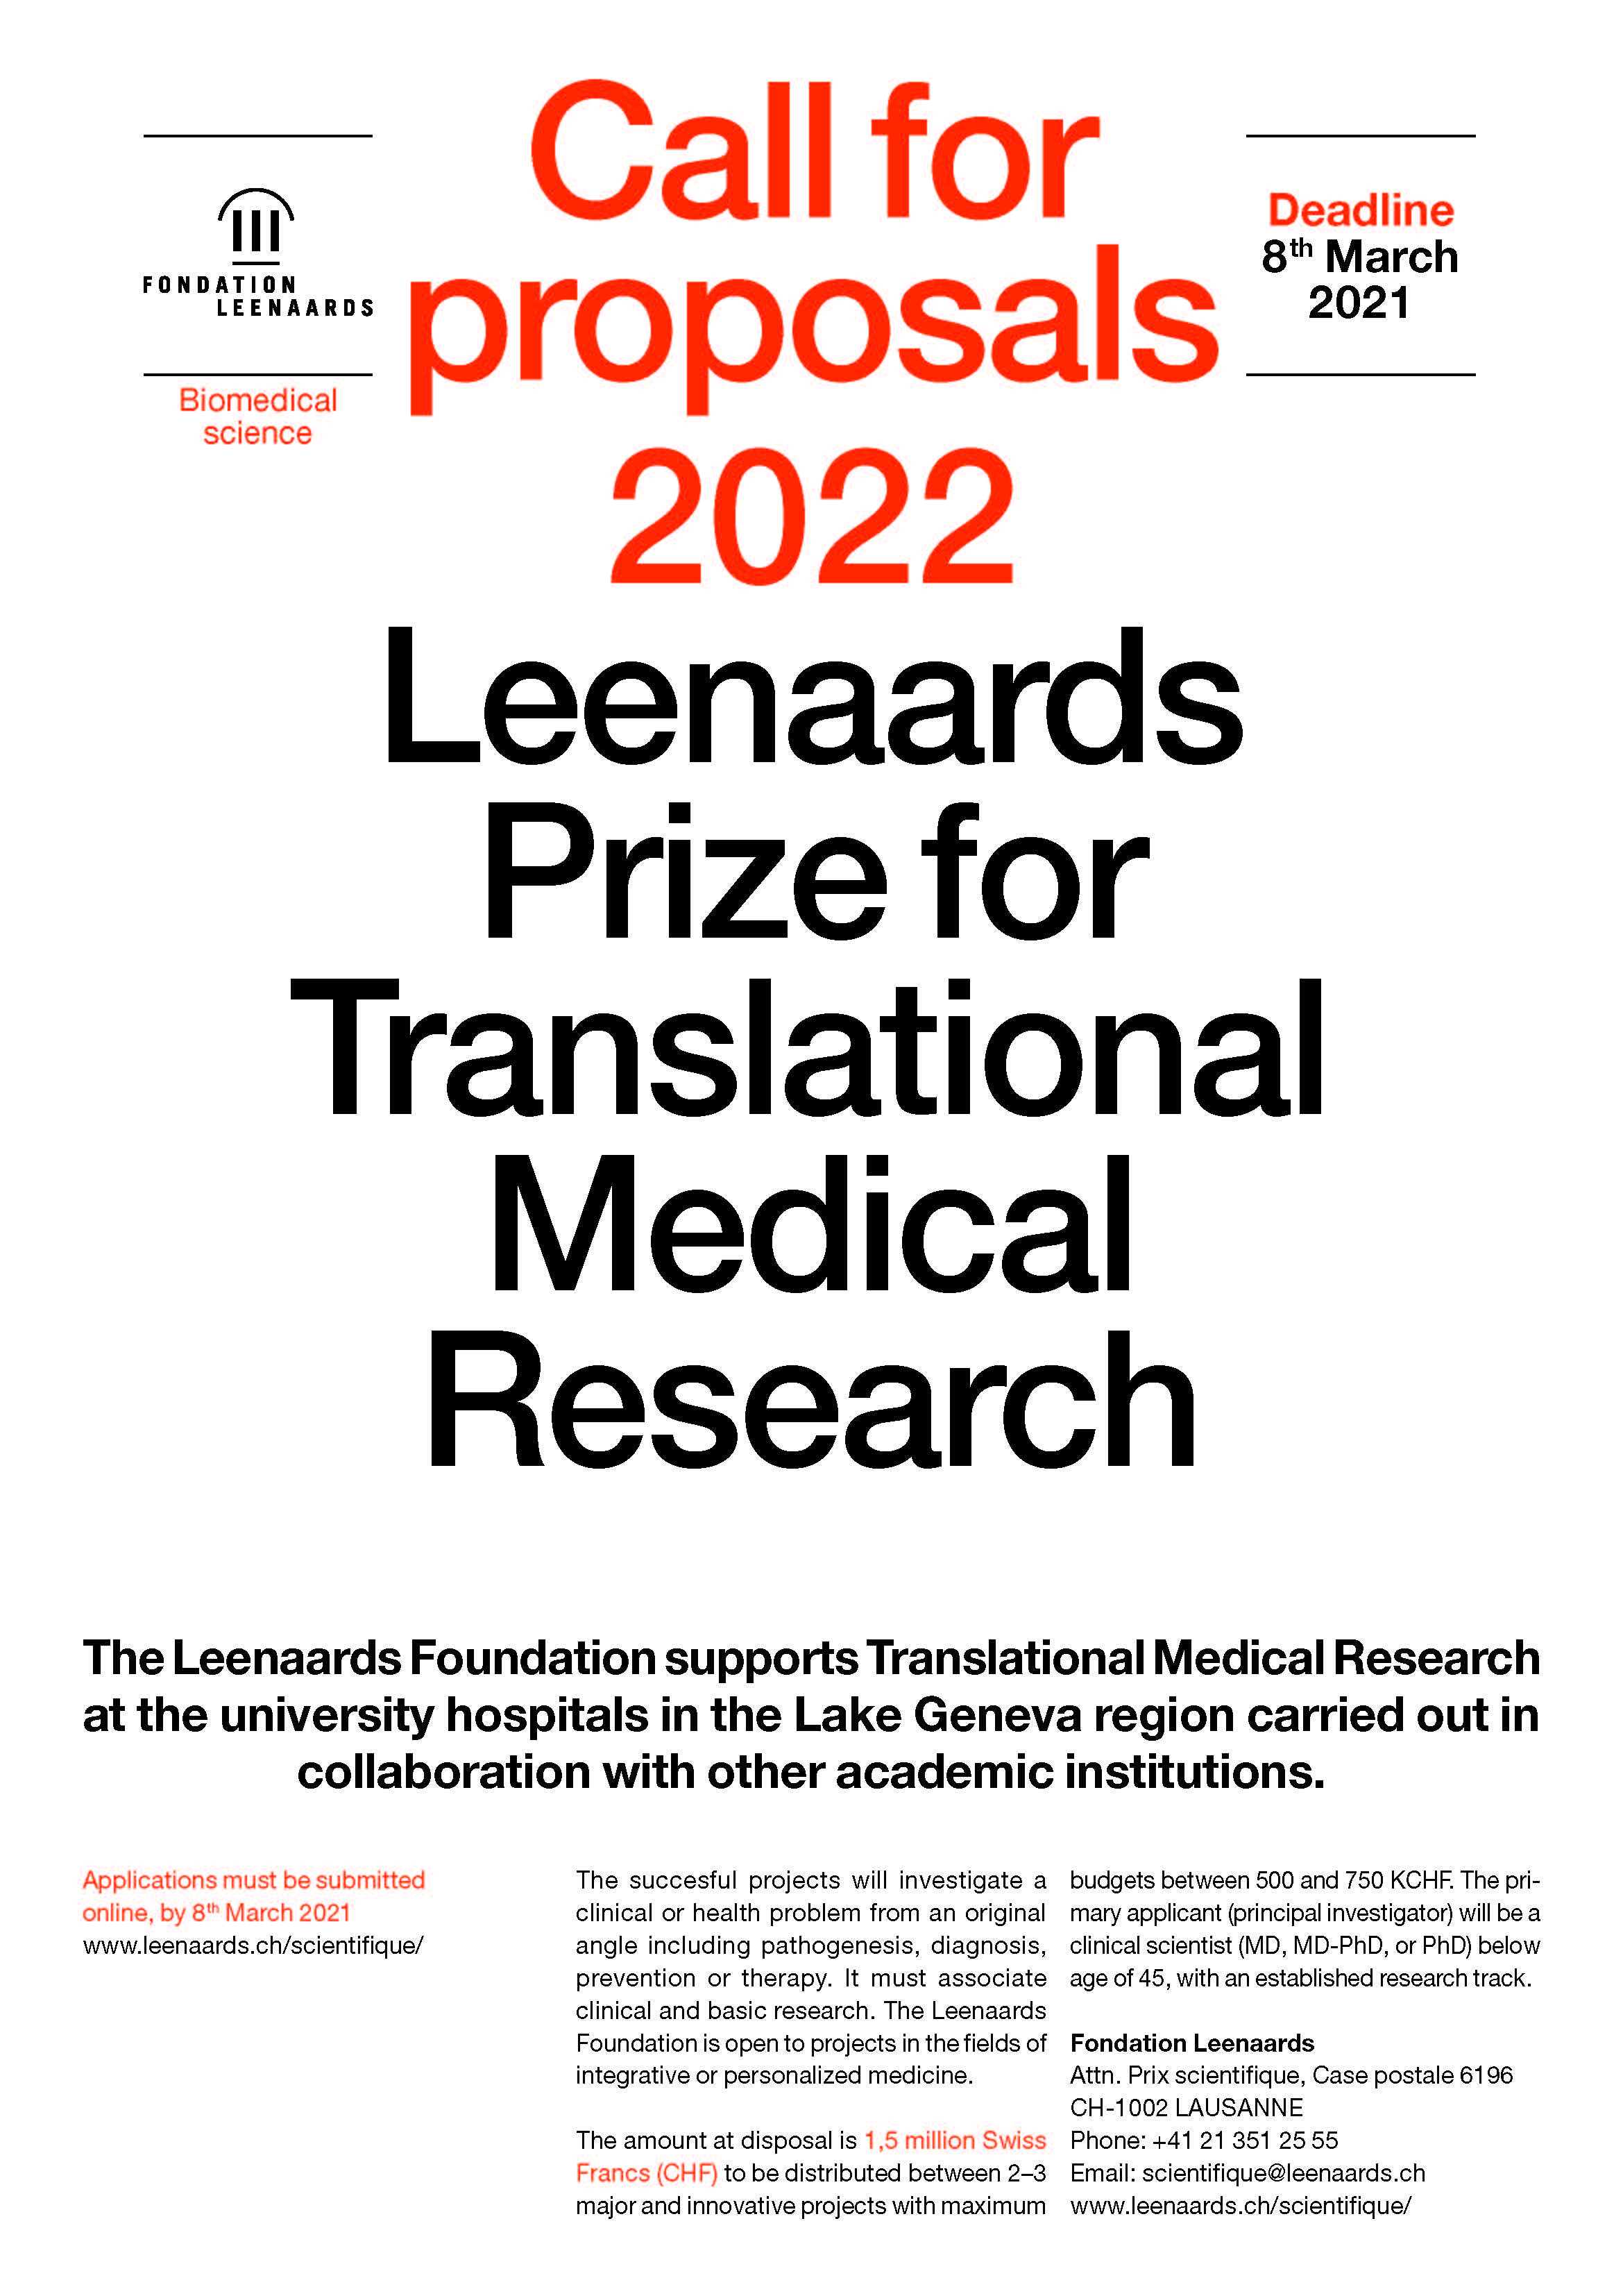 Call_for_proposals_2022_Leenaards_Prize_Print_A3.jpg